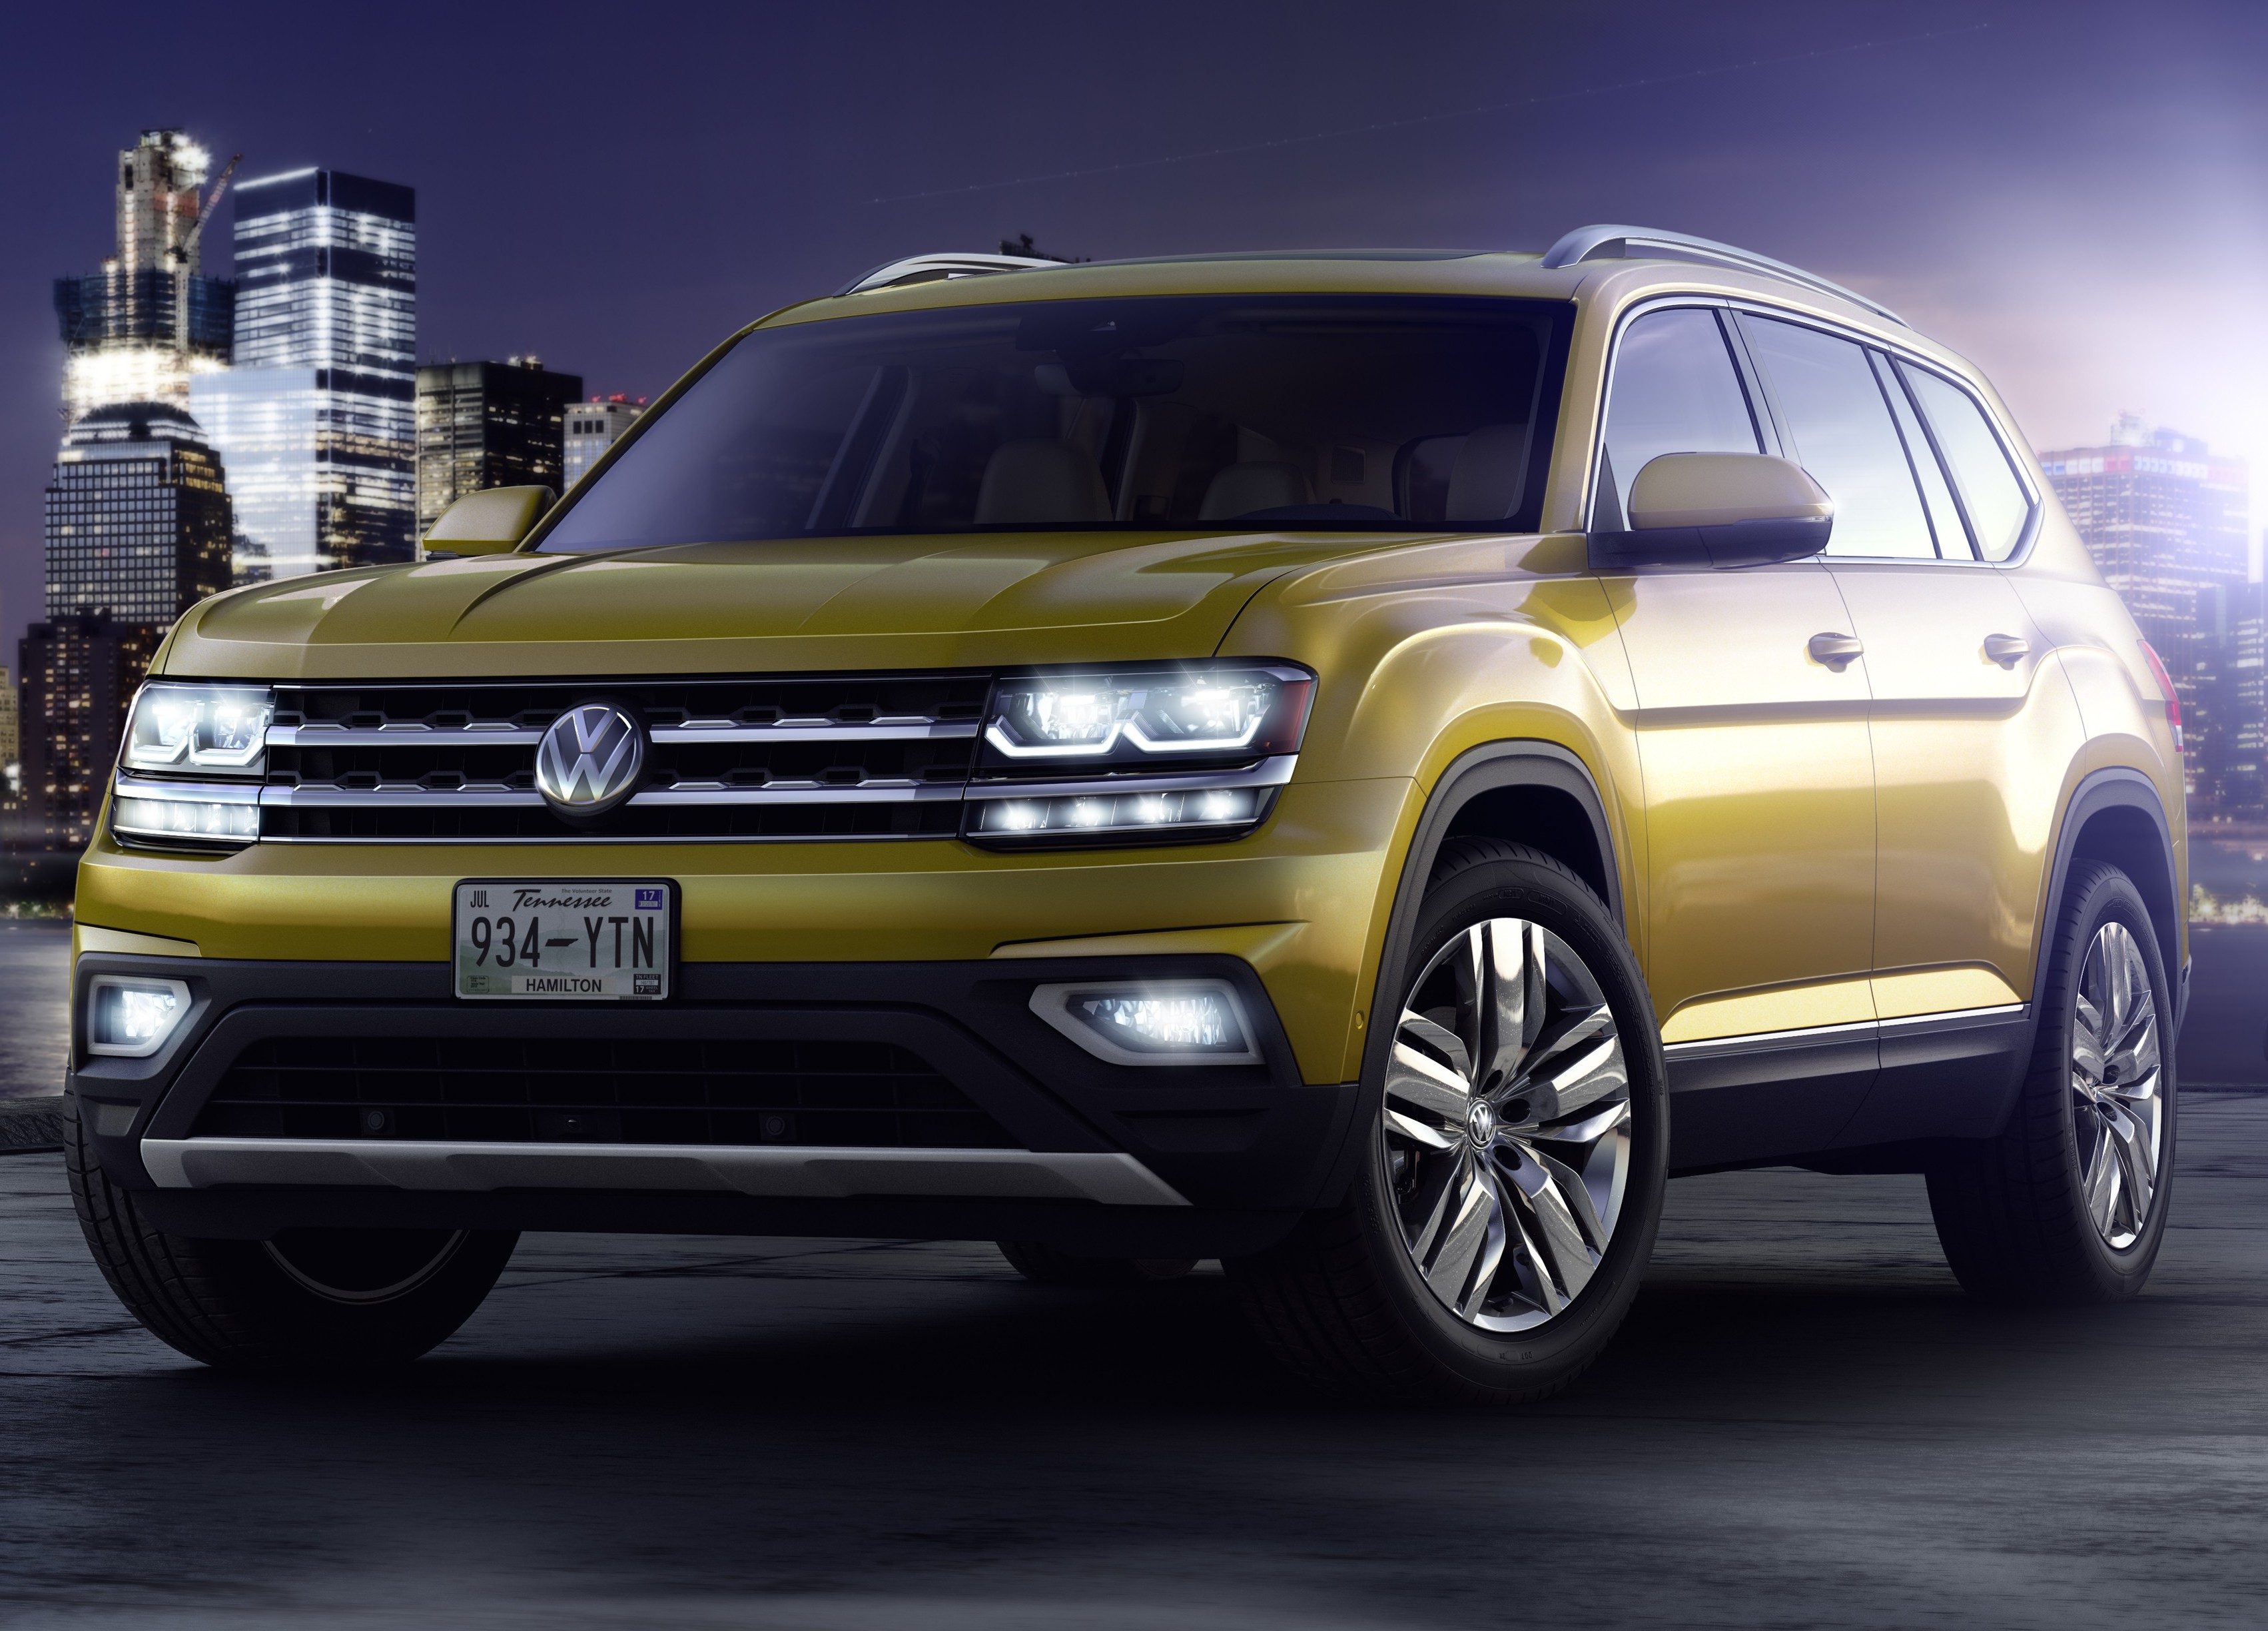 Volkswagen Atlas 7-seat SUV Officially Unveiled